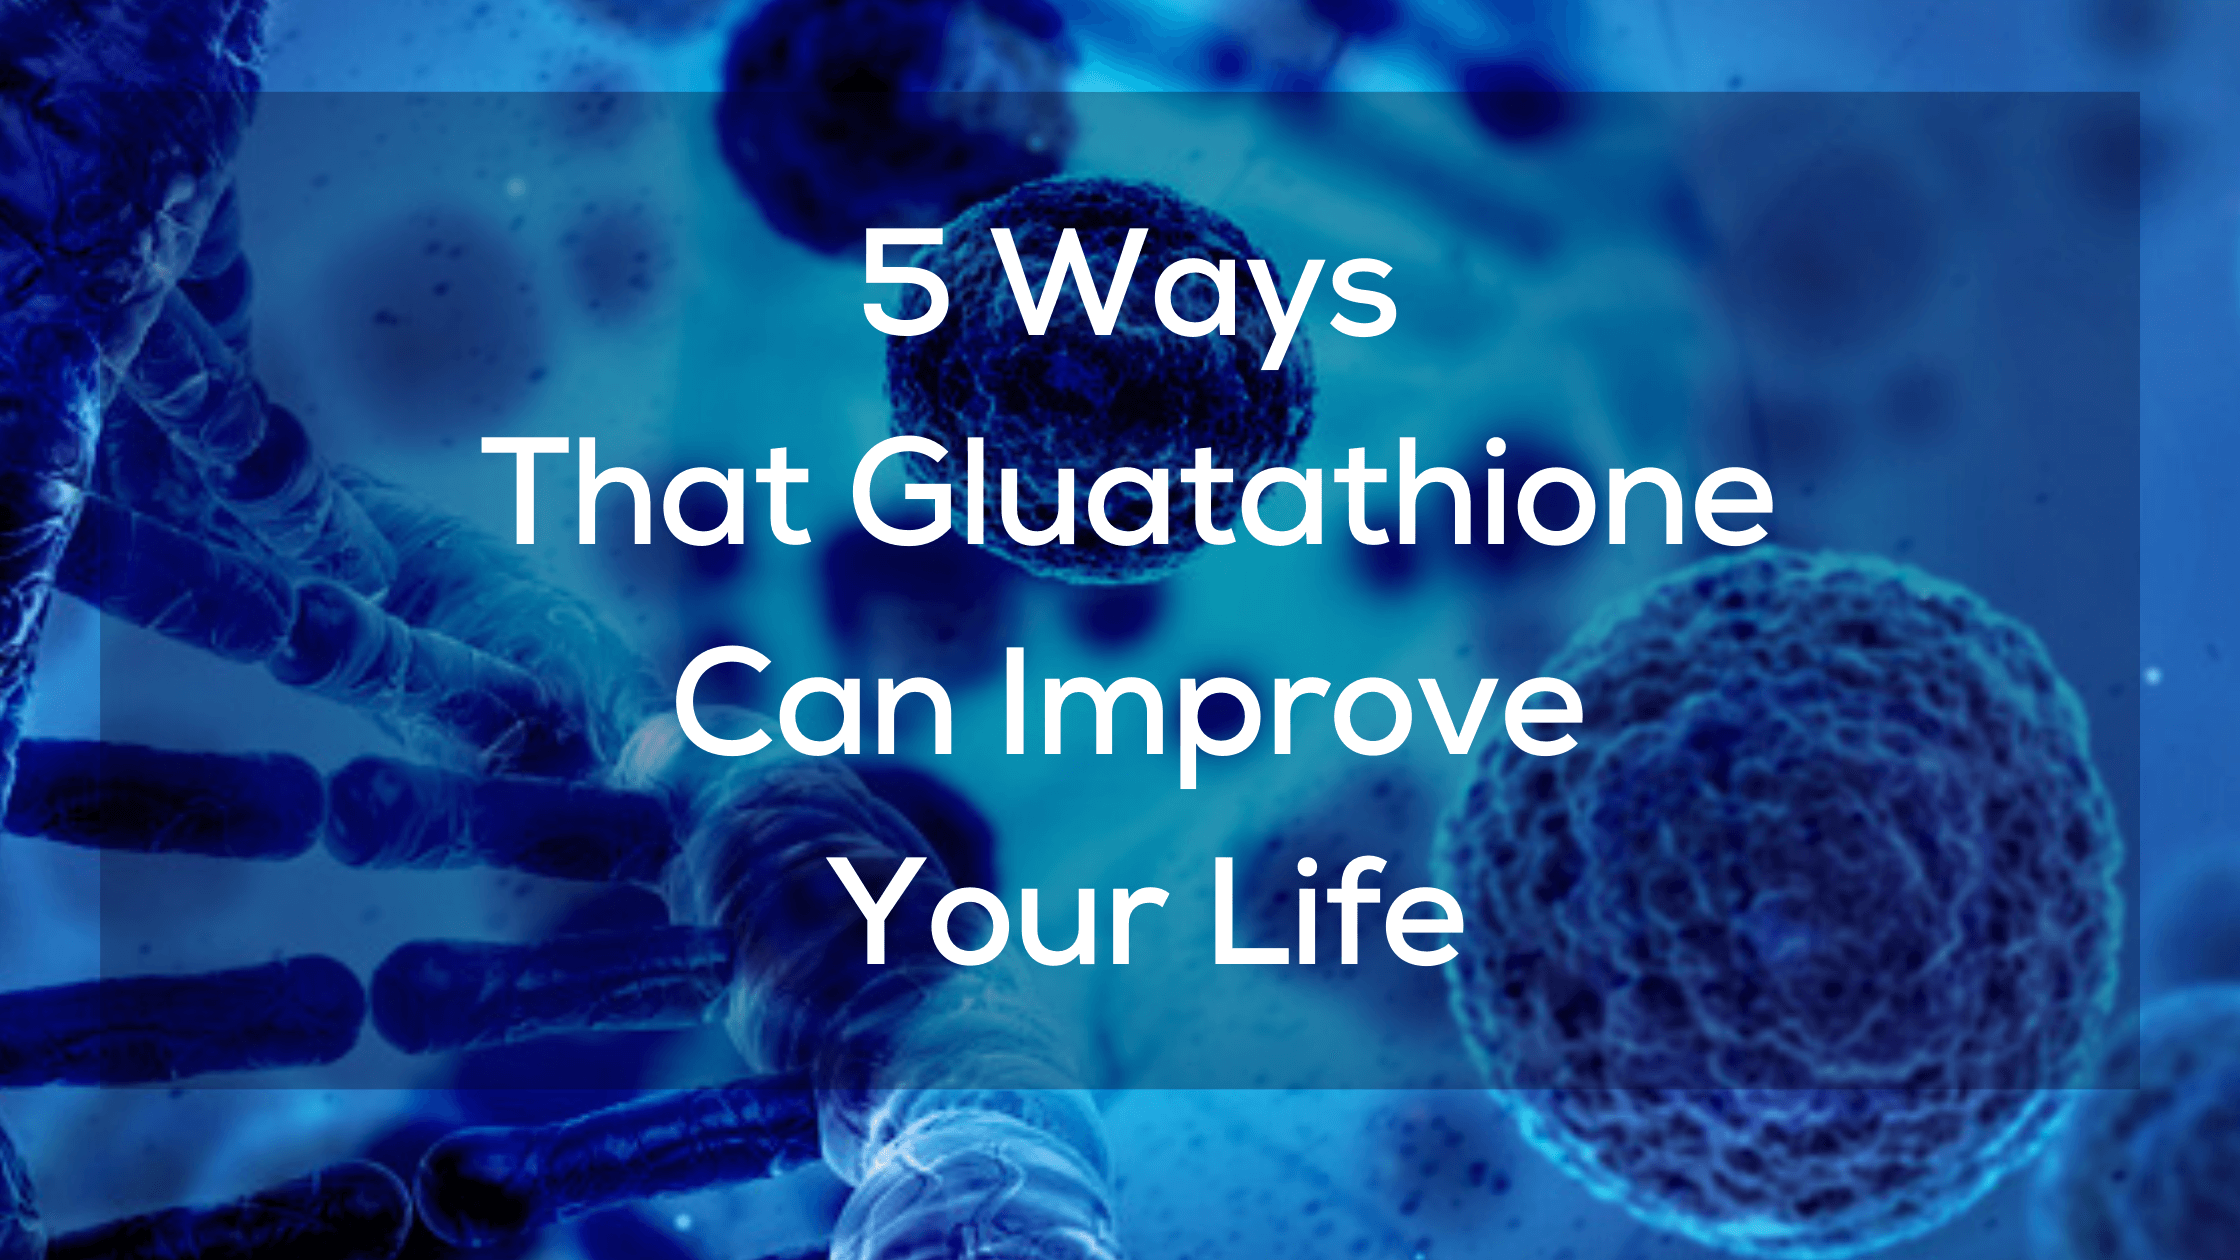 5 Ways That Gluatathione Can Improve Your Life